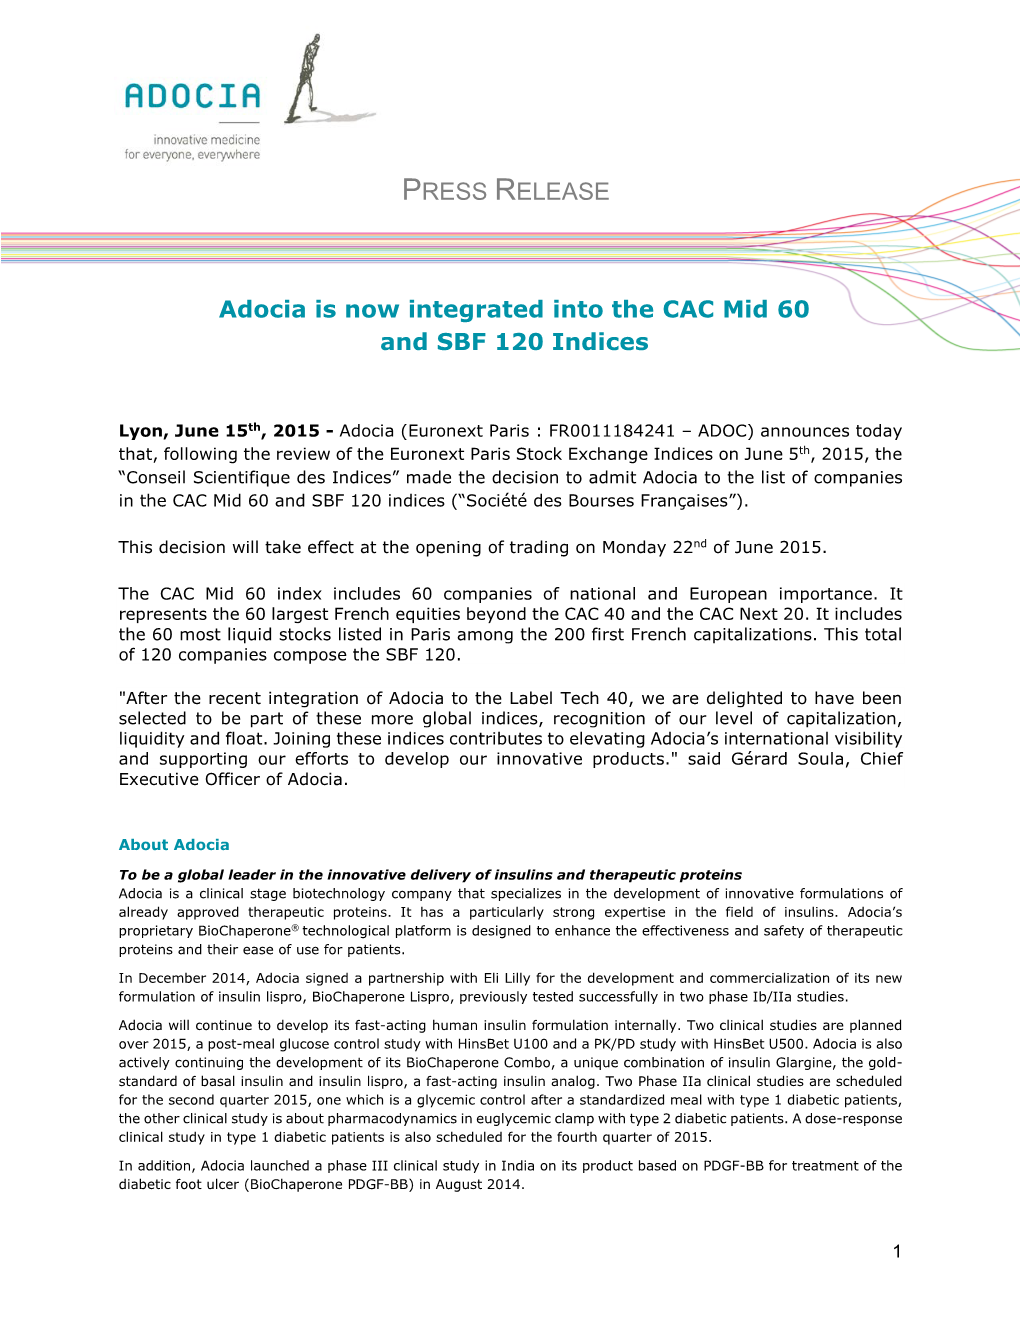 PRESS RELEASE Adocia Is Now Integrated Into the CAC Mid 60